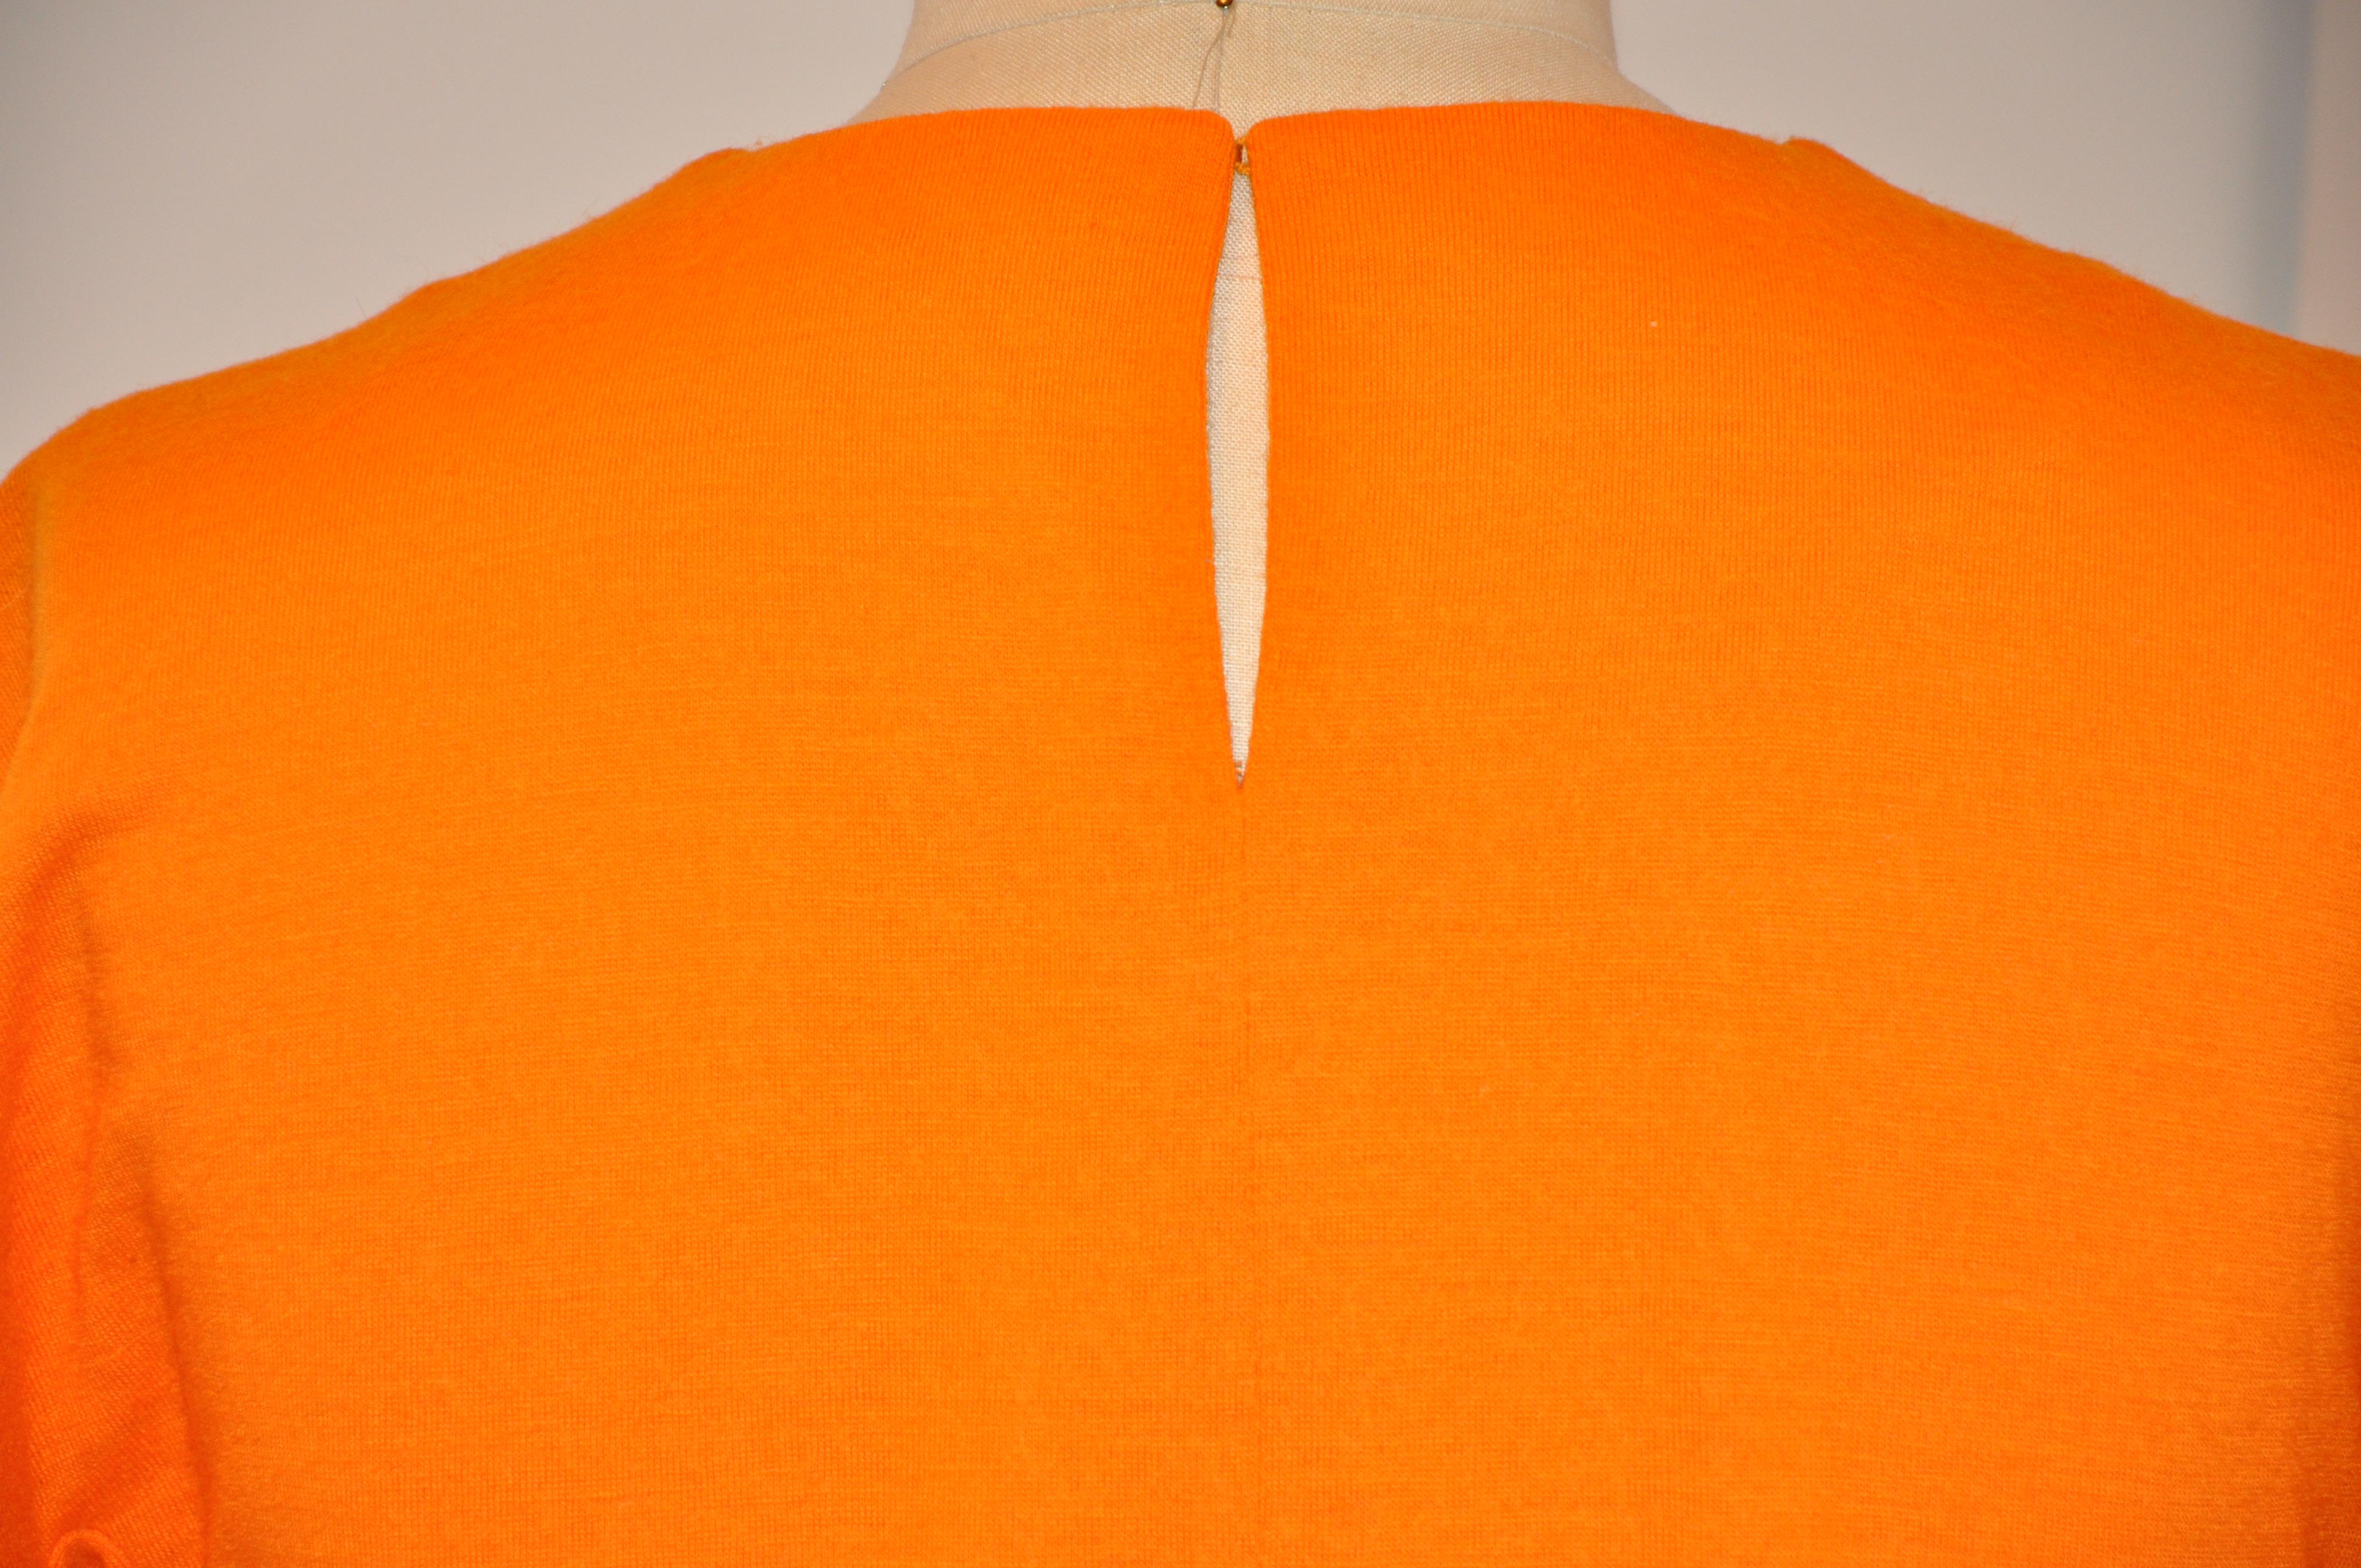 Rare Stephen Sprouse Warm Tangerine Wool Jersey Pullover Top For Sale 2